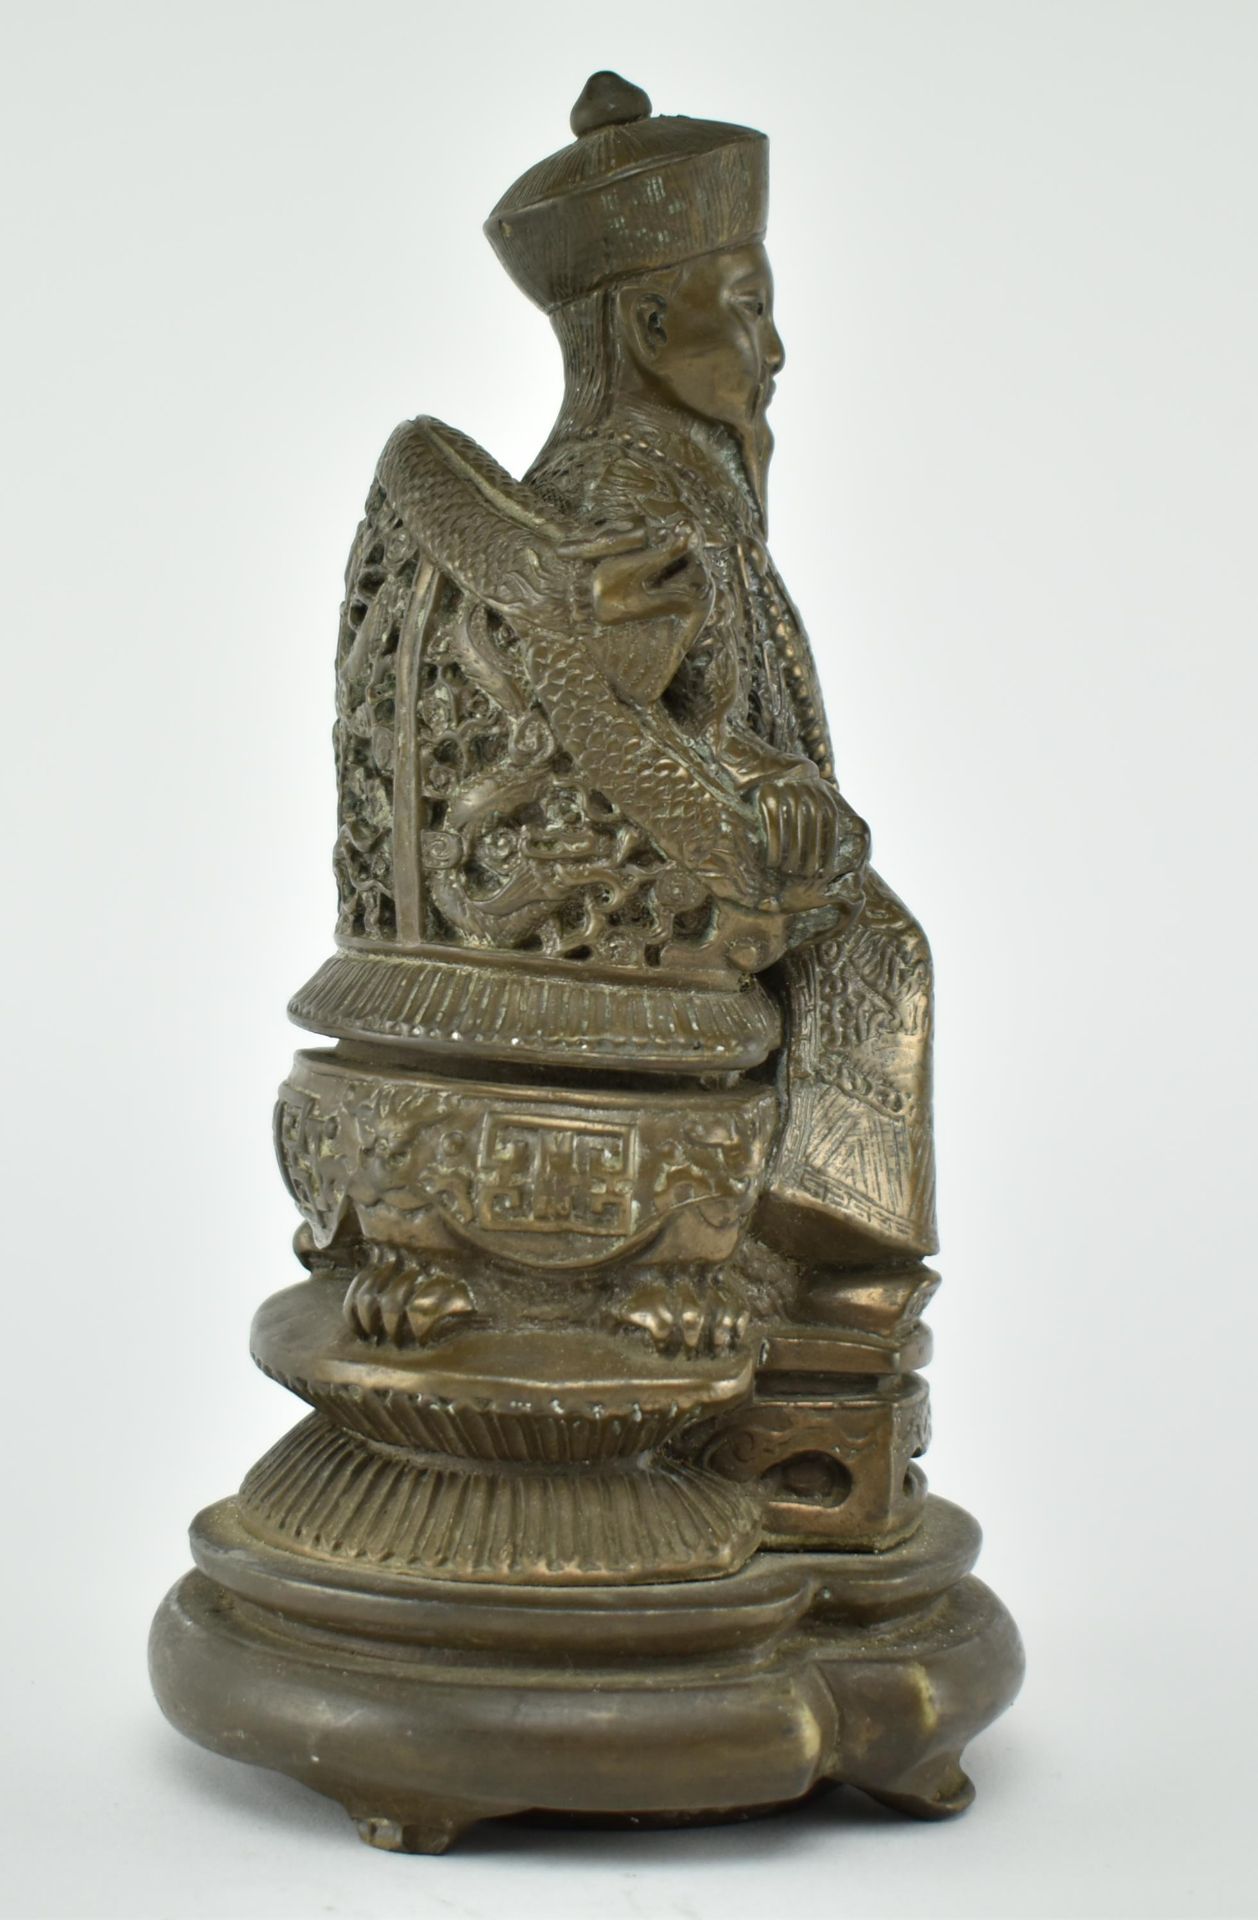 20TH CENTURY CHINESE BRONZE SCULPTURE OF AN EMPERIOR - Image 2 of 5